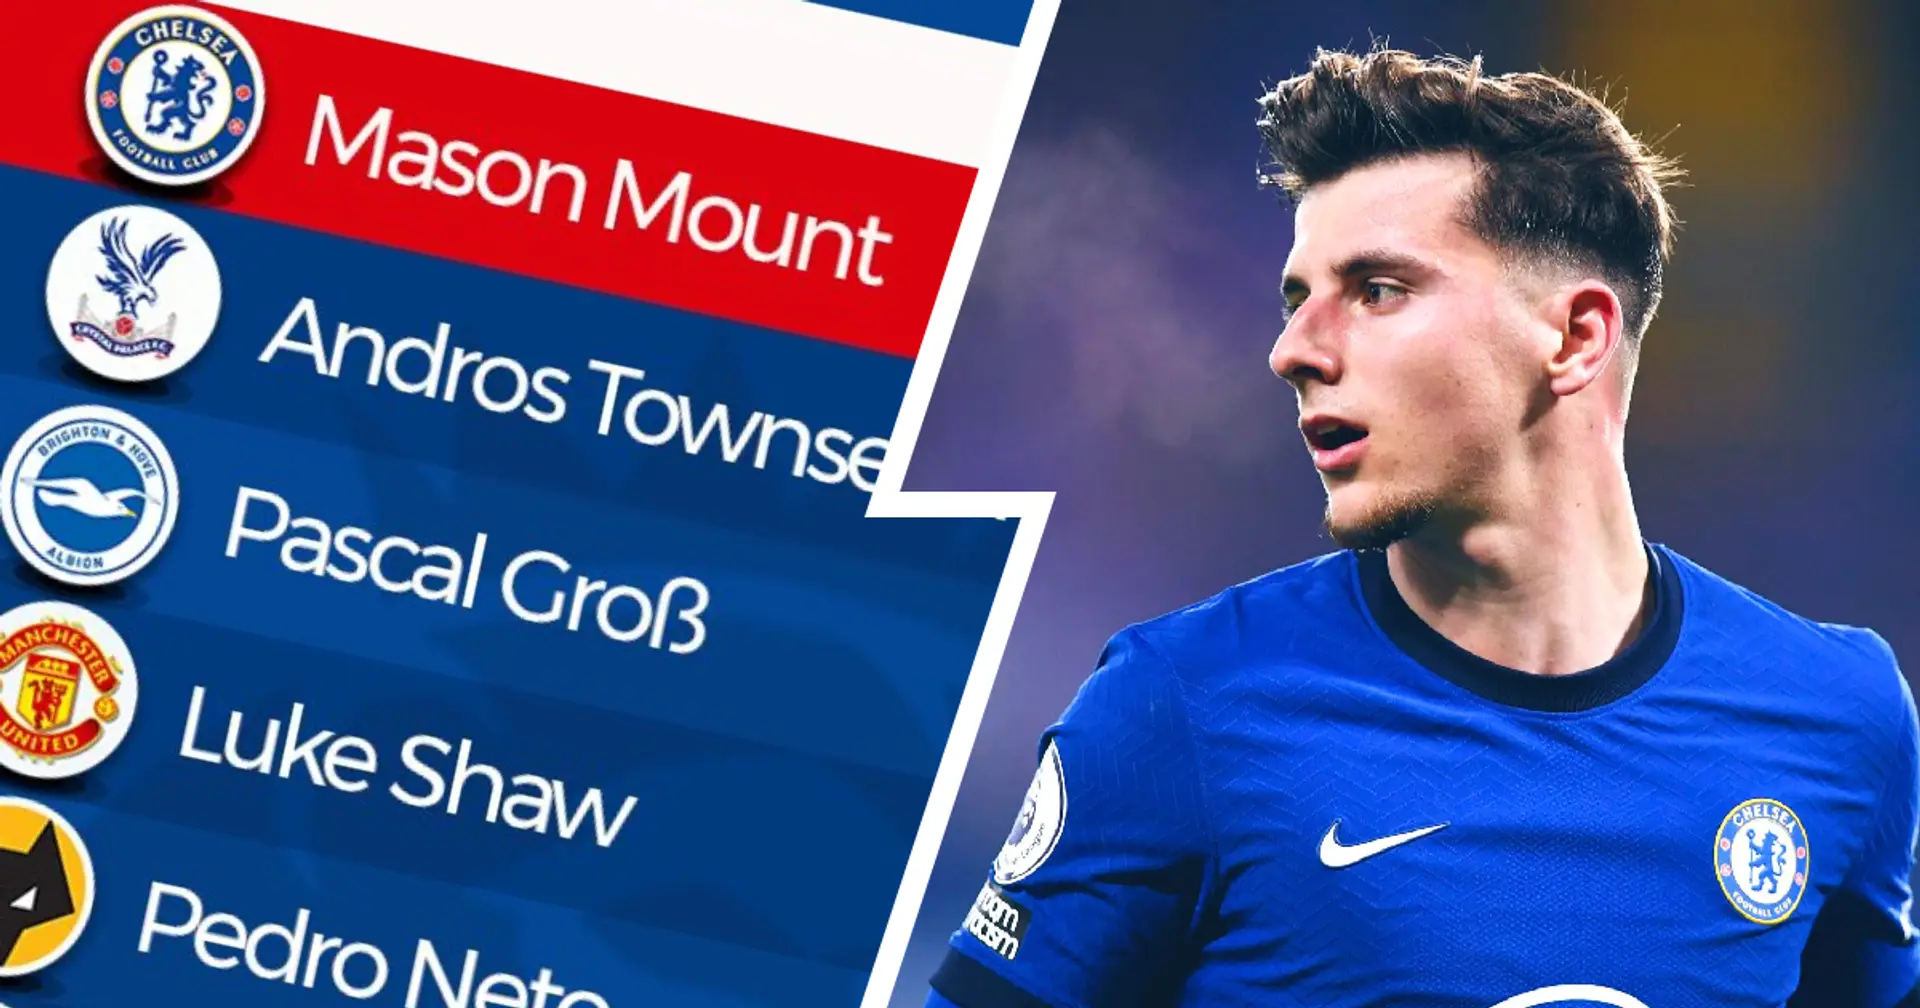 1st in the league: Mason Mount dominates PL players in unexpected crossing stat